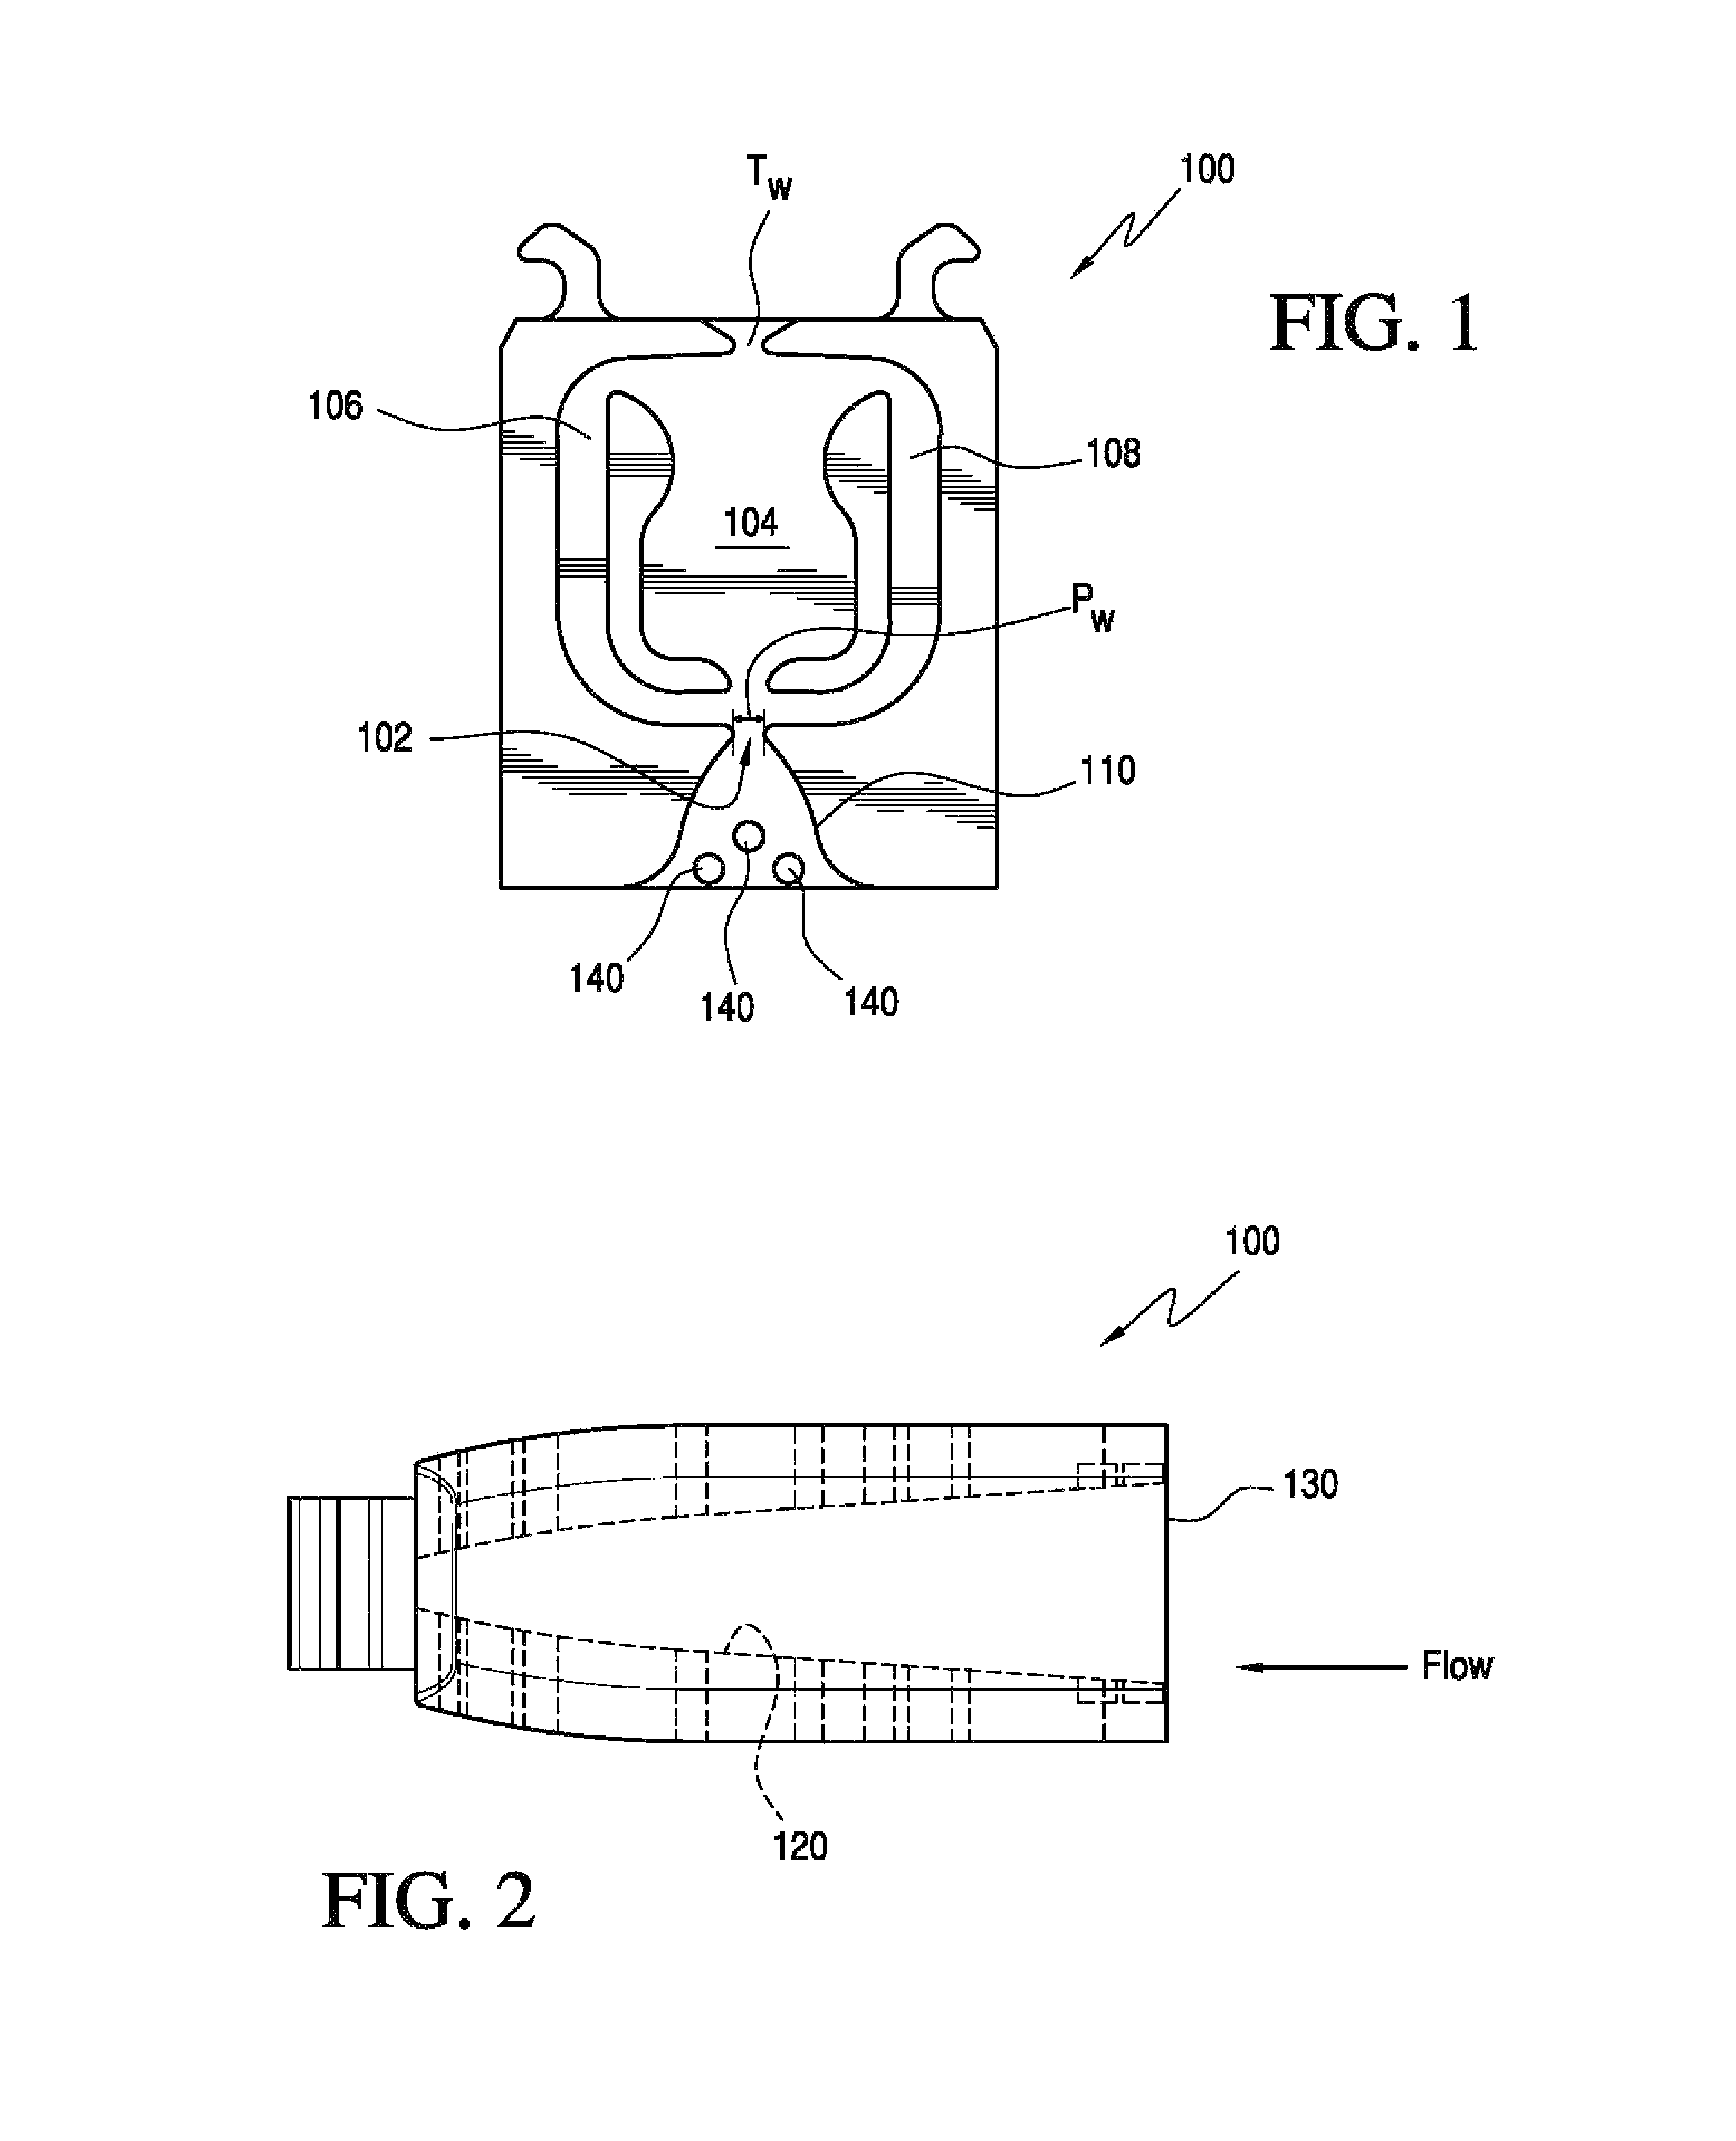 Nozzle and fluidic circuit adapted for use with cold fluids, viscous fluids or fluids under light pressure